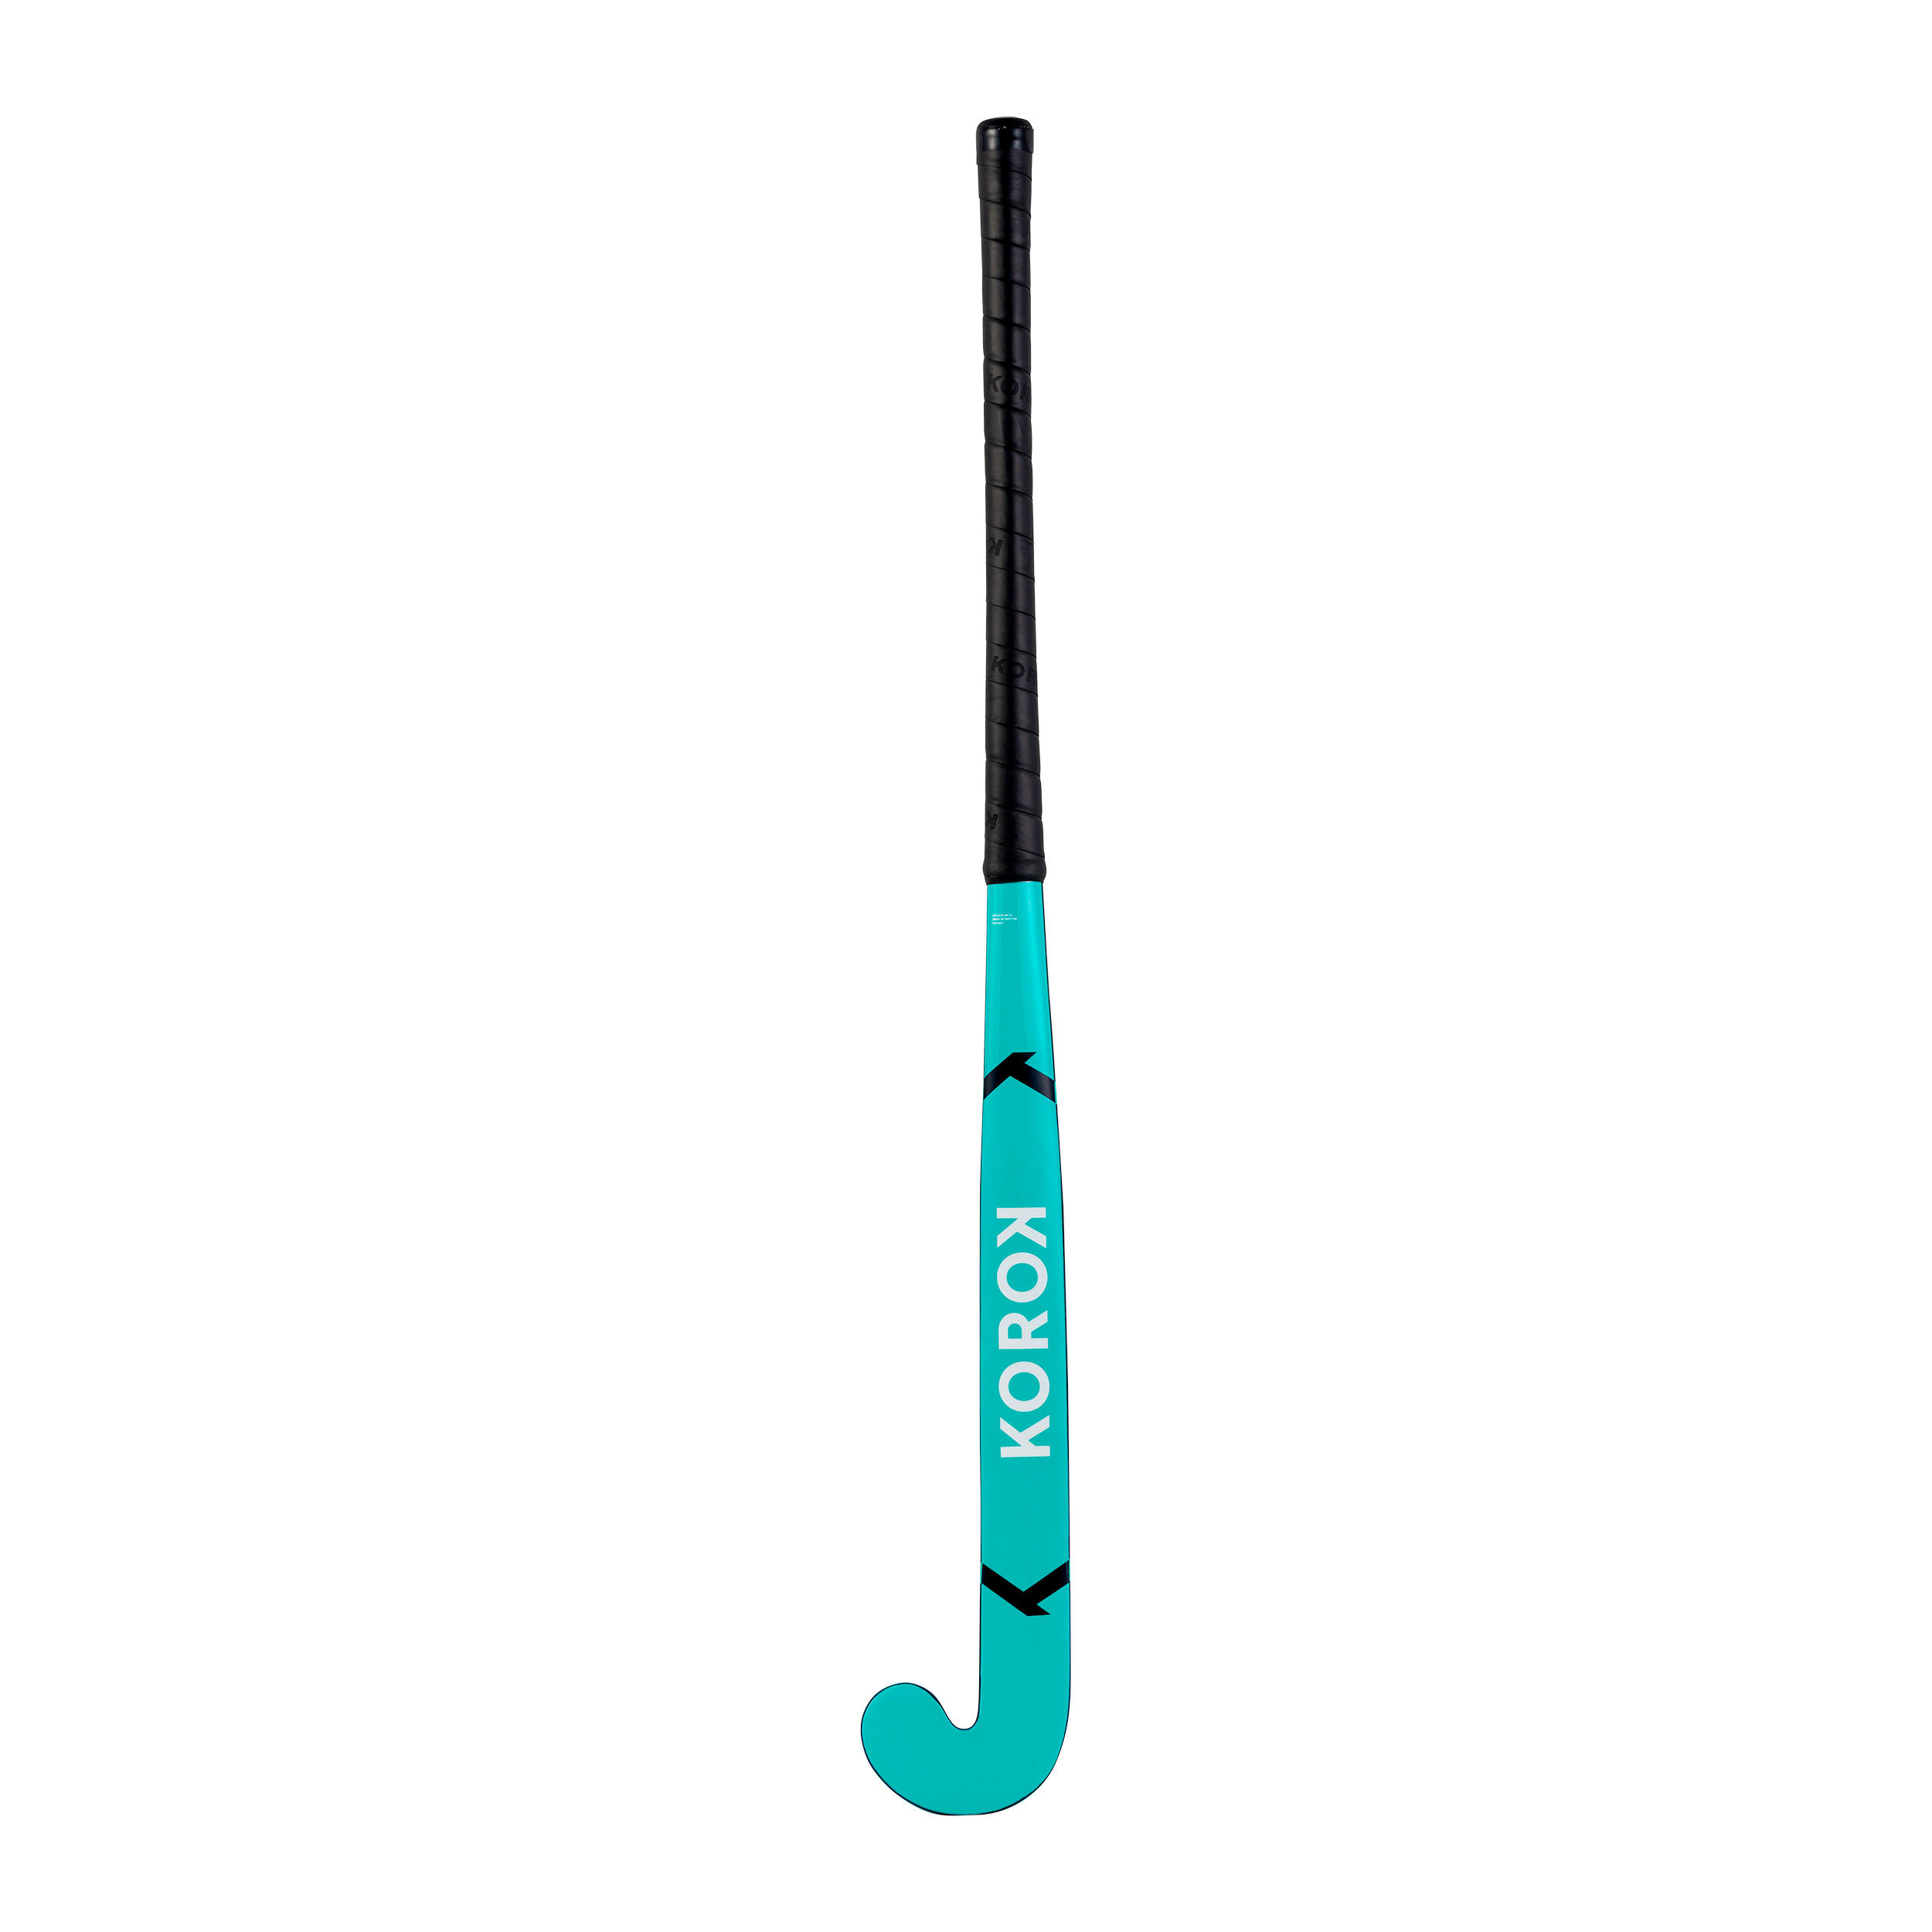 Adult Occasional Wood/Fibreglass Field Hockey Stick FH100 - Turquoise Blue 5/12